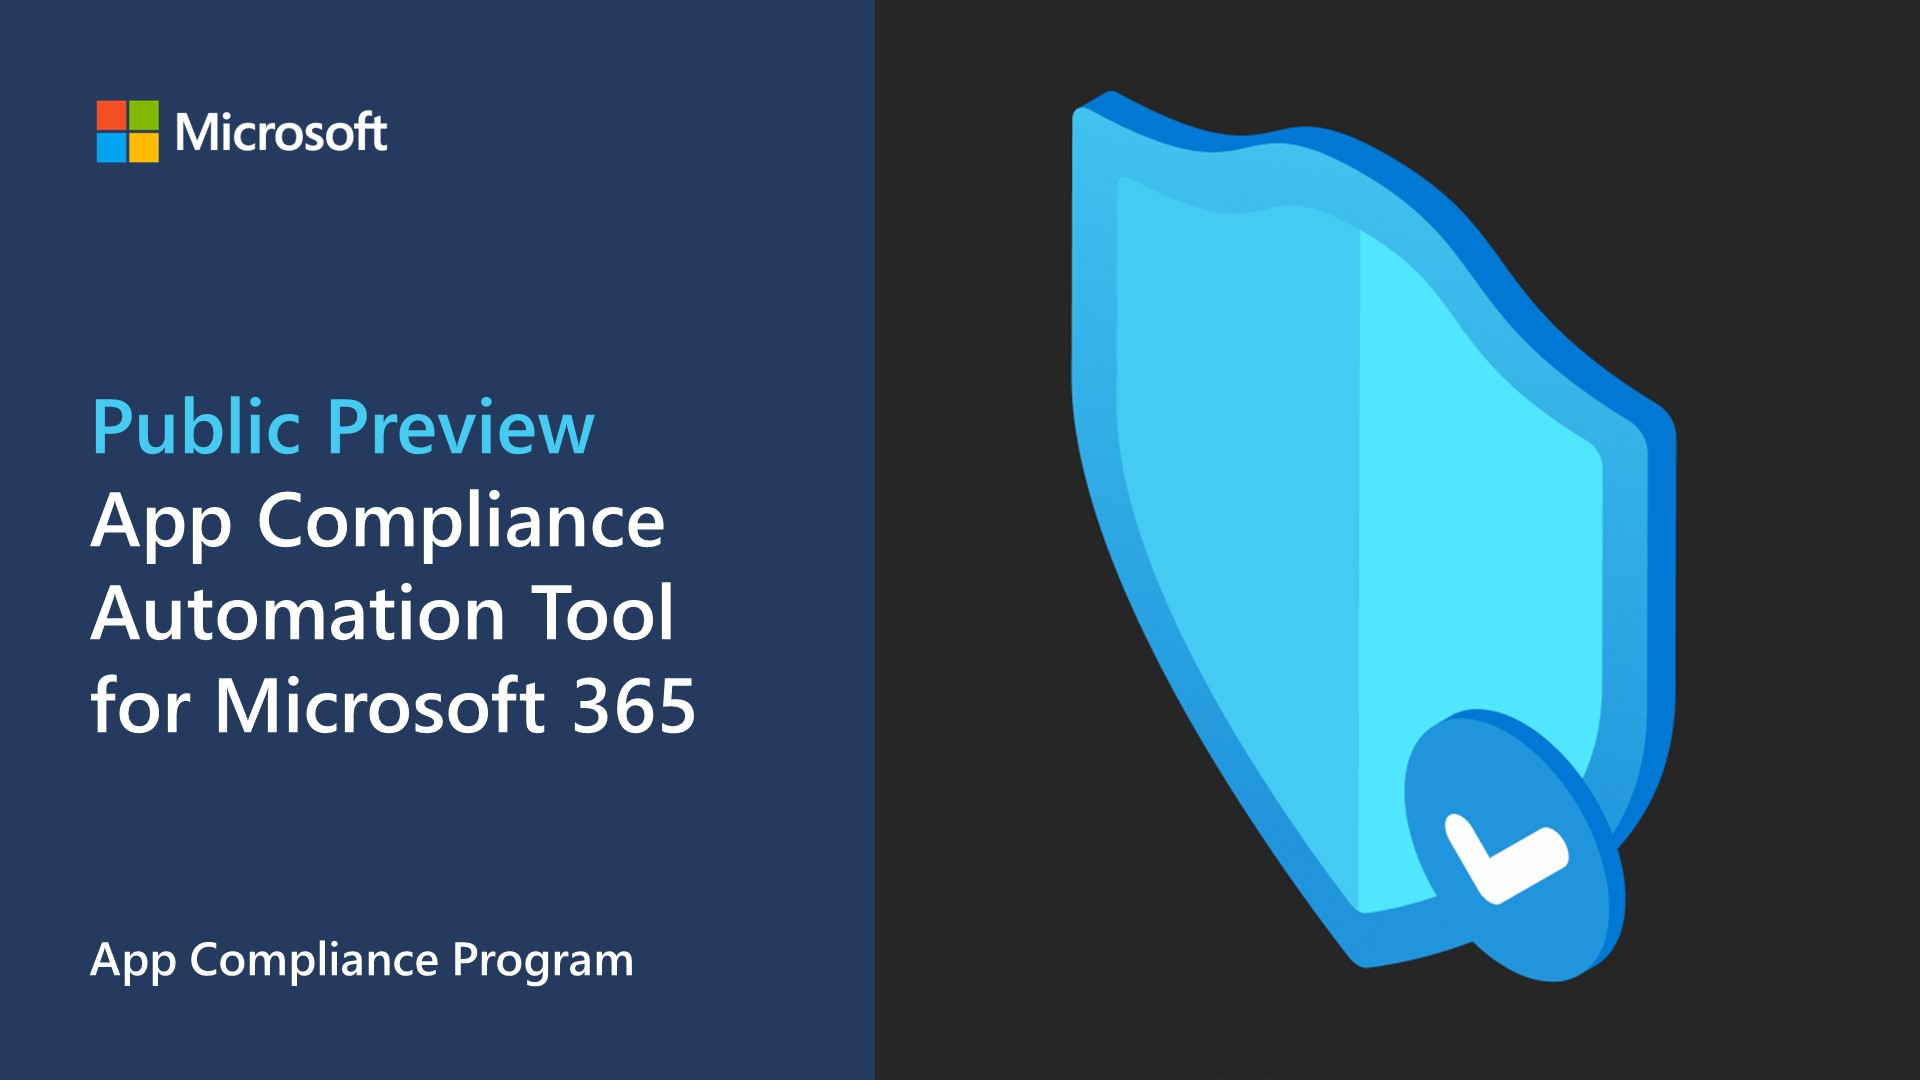 App Compliance Automation Tool for Microsoft 365 is now in public preview